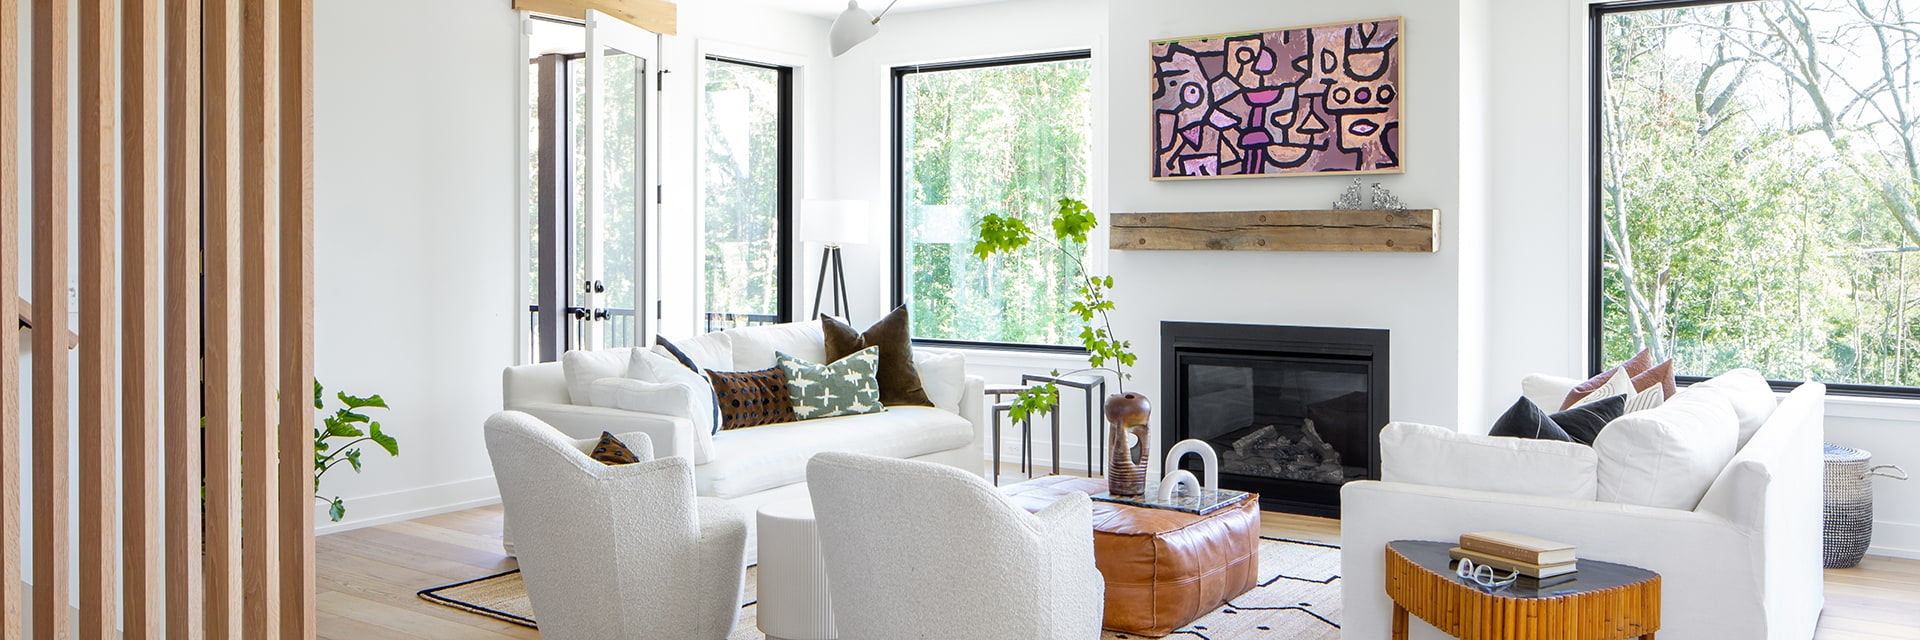 White furniture in a contemporary living room with white walls and black picture windows